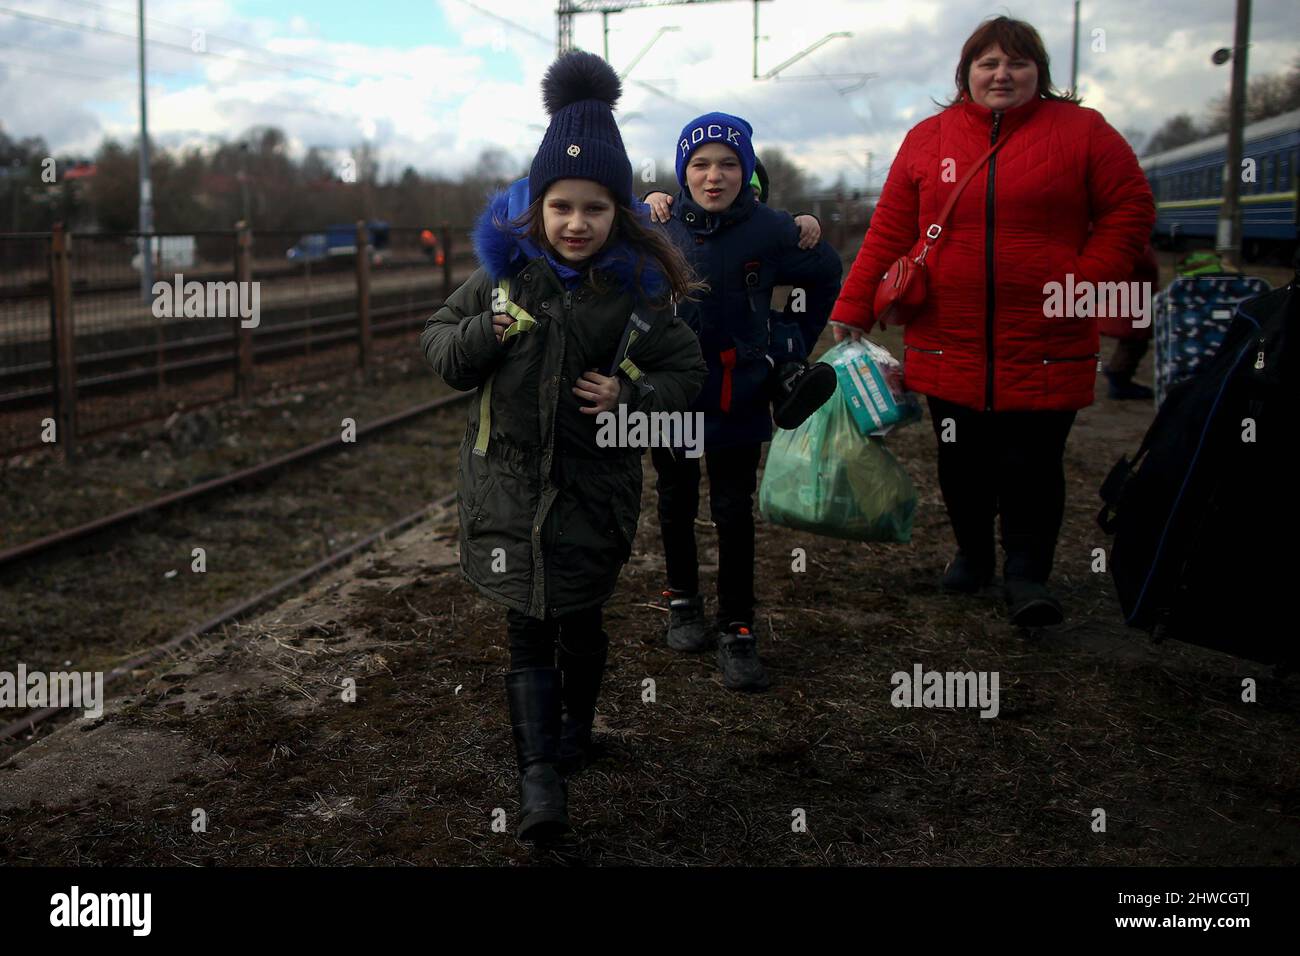 Ukrainian refugees seen at Olkusz train station. Over 700,000 Ukrainian people seek refuge in Poland as result of Russiaís aggression on their country. Many of them come to Polish cities by train, where humanitarian help is organized for those in need. Stock Photo